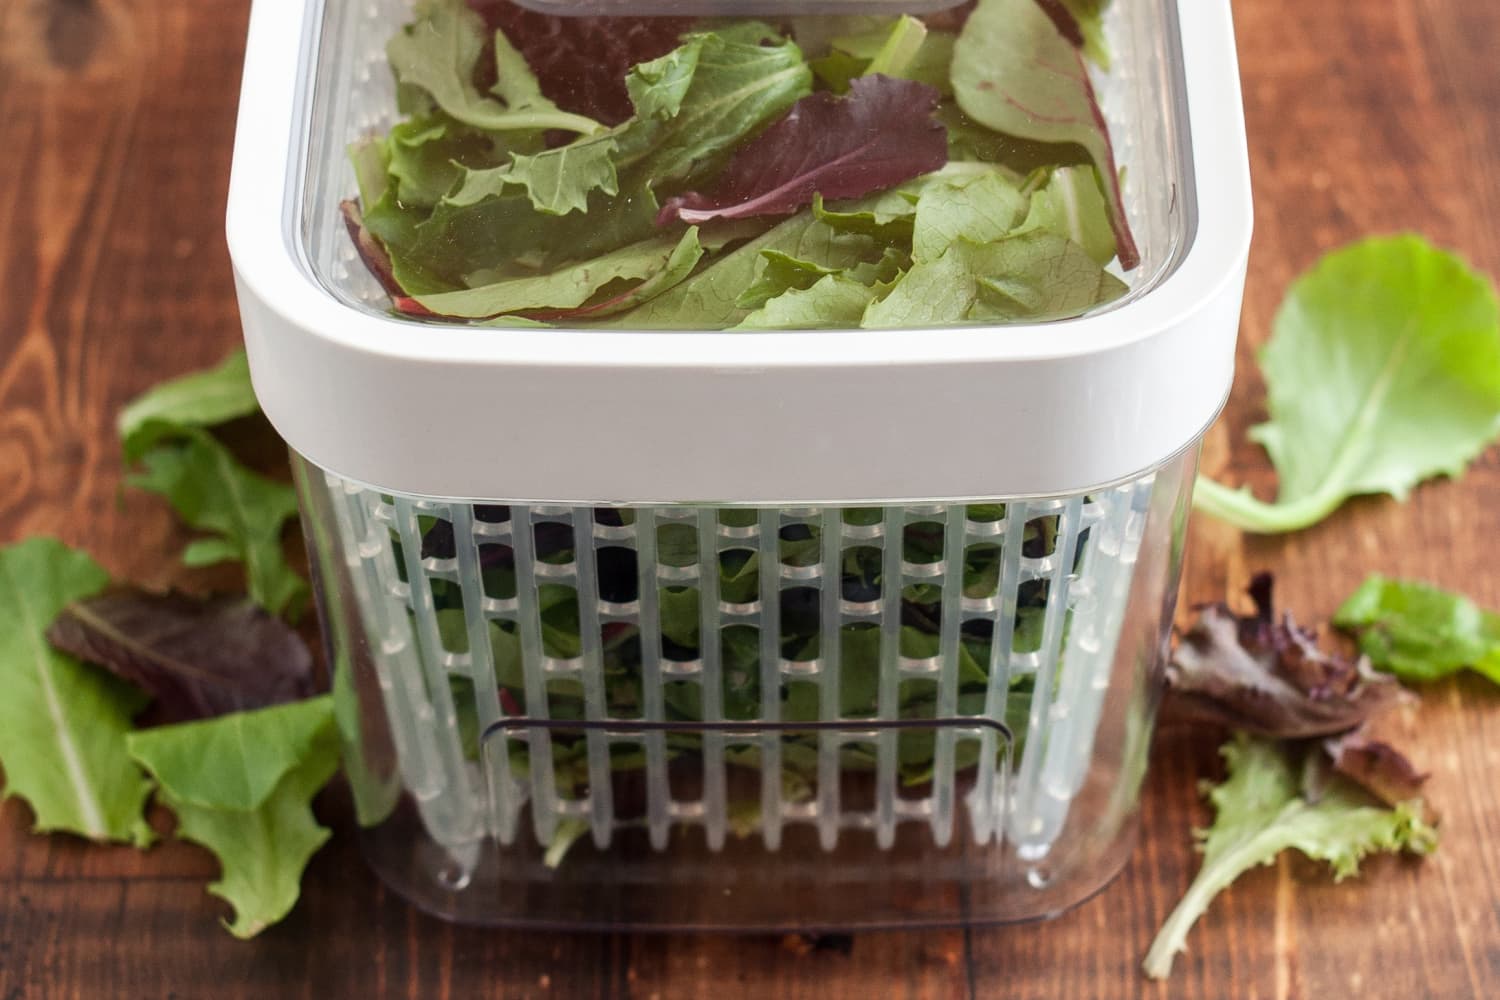 OXO's GreenSaver Produce Keeper: Product Review